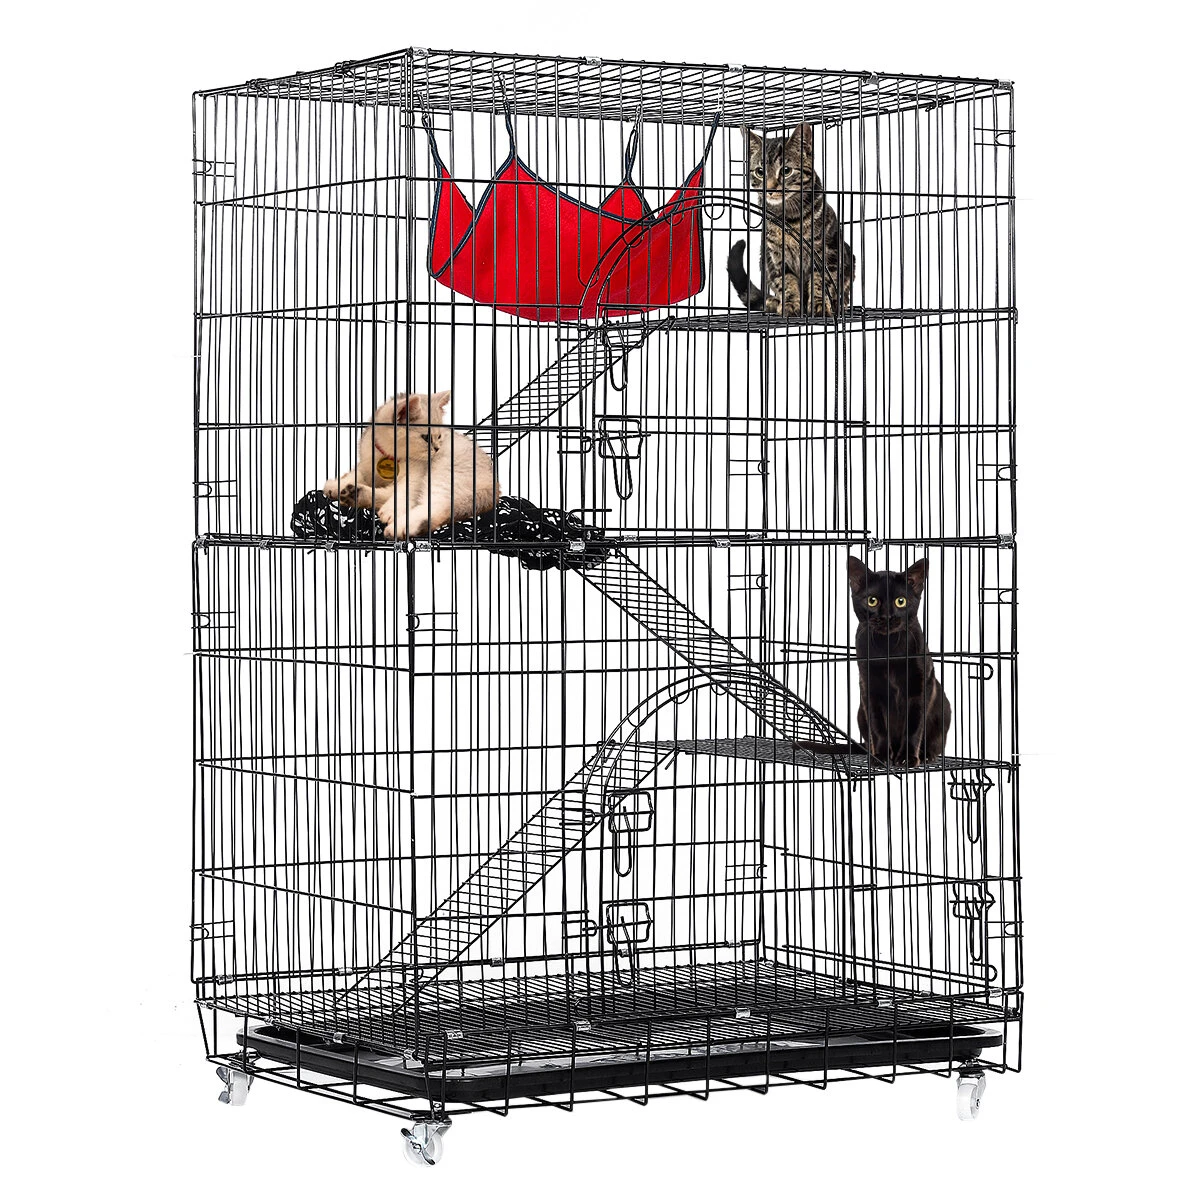 PawGiant 4 Tier Cat Cage Cat Playpen Kennel Crate Chinchilla Rat Box Cage Enclosure with Ladders Platforms Beds Latches Tray Hammock